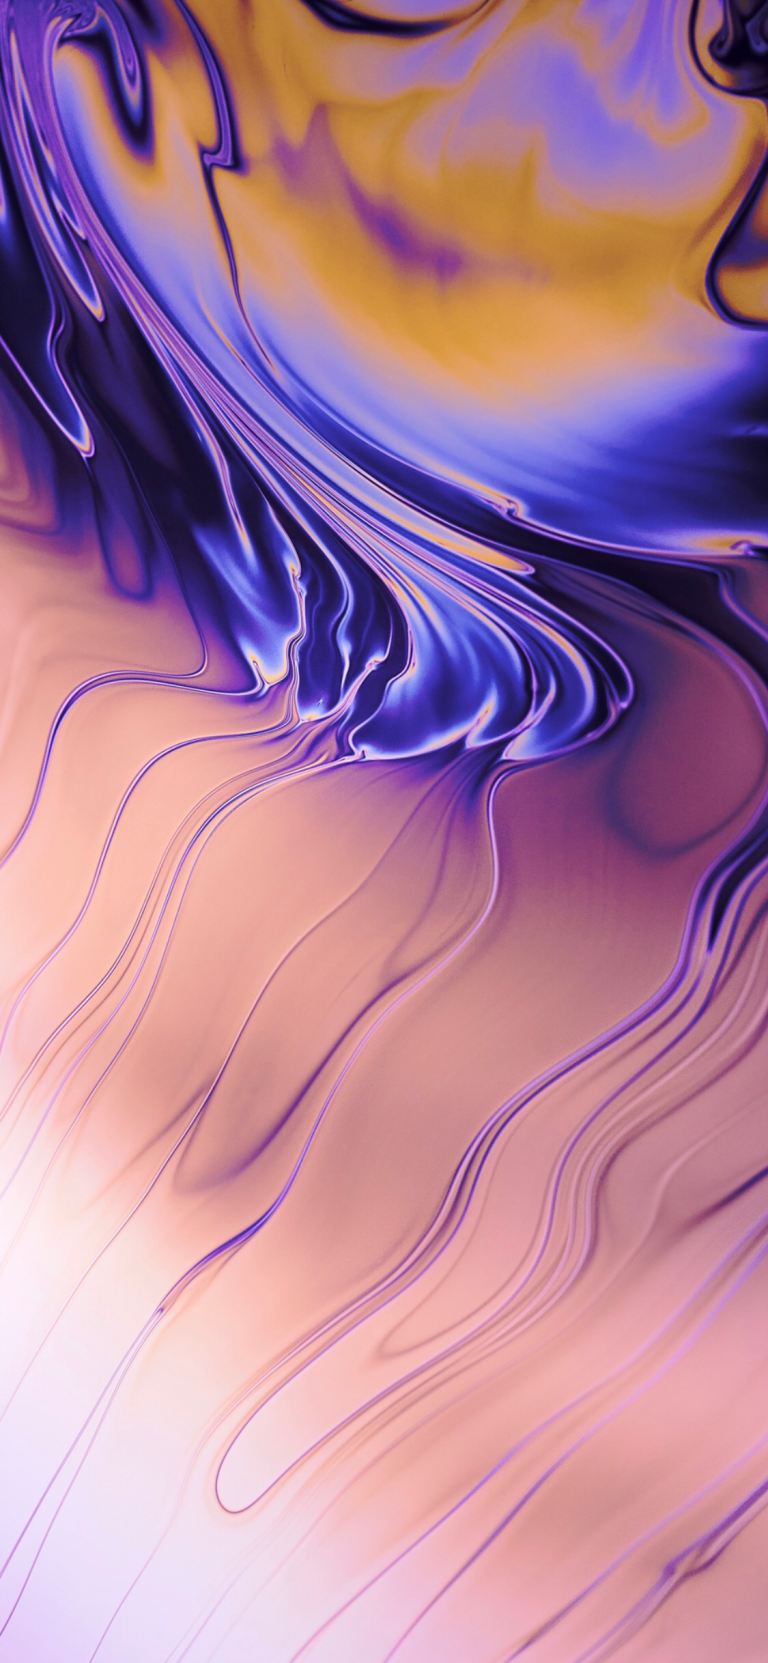 Mac Os Mojave Wallpapers For Iphone - HD Wallpaper 